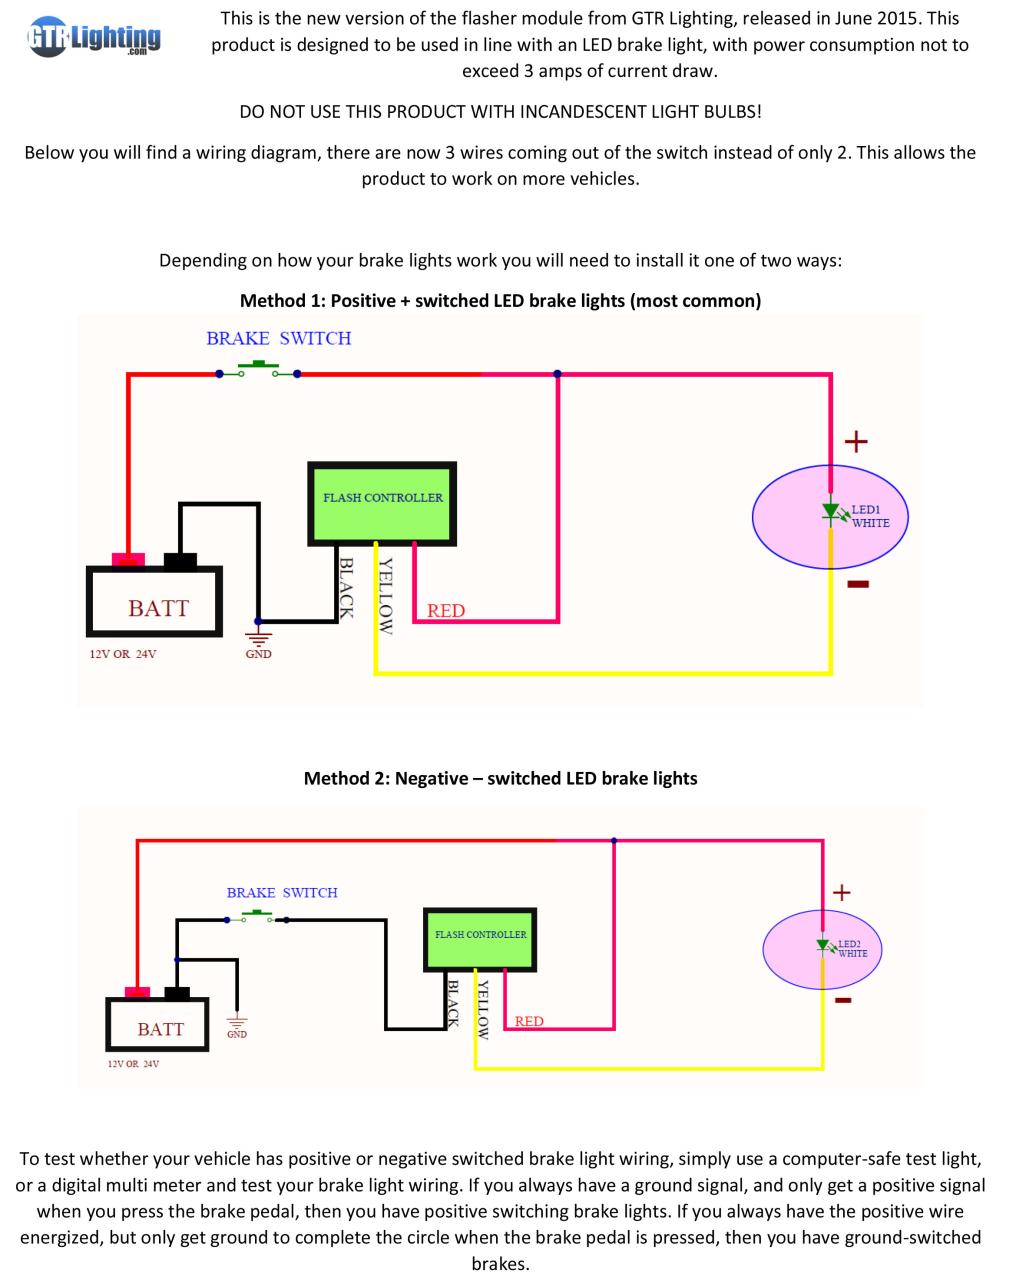 3 Wire Led Light Wiring Diagram